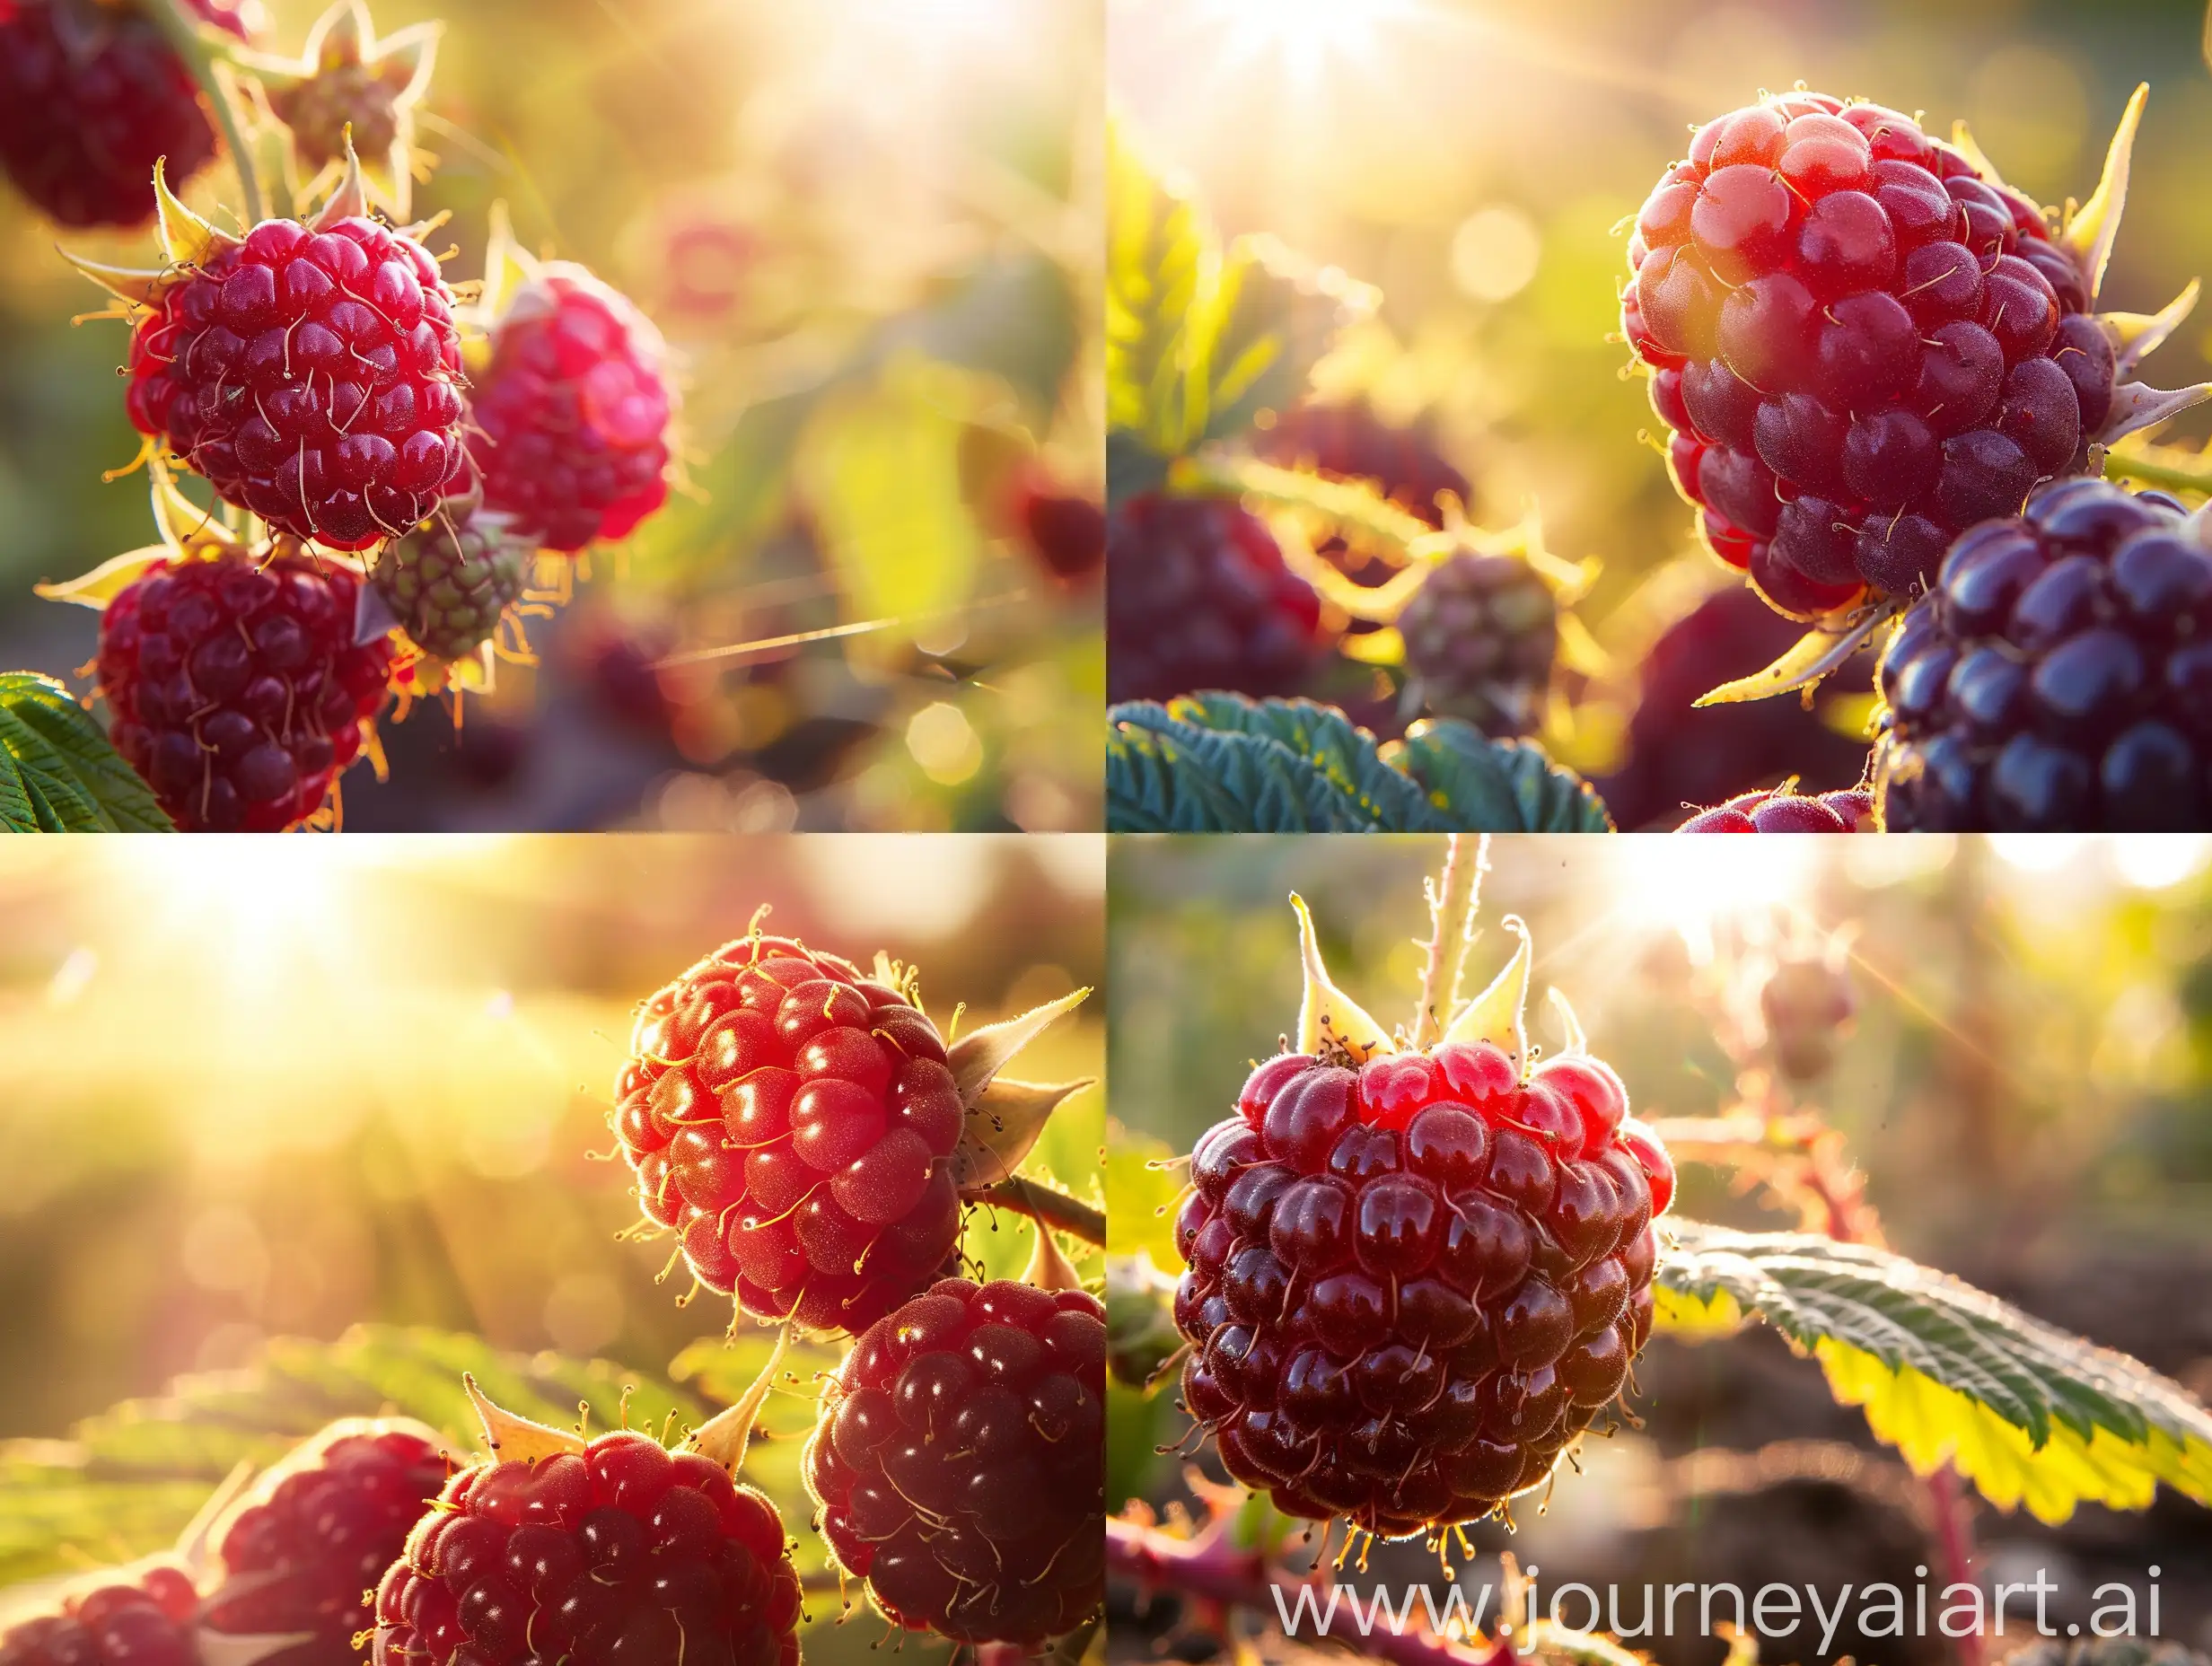 Close up high detailed photo capturing a Raspberry, Crimson Night PPAF. The sun, casting a warm, golden glow, bathes the scene in a serene ambiance, illuminating the intricate details of each element. The composition centers on a Raspberry, Crimson Night PPAF. Expect bountiful harvests of dark, shiny berries in the fall. Fruits are medium-large, conical with excellent flavor. Plants tend to be compact with dark purple canes that are attractive in container and small garden plots. A new selection that deserves a. The image evokes a sense of tranquility and natural beauty, inviting viewers to immerse themselves in the splendor of the landscape. --ar 16:9 